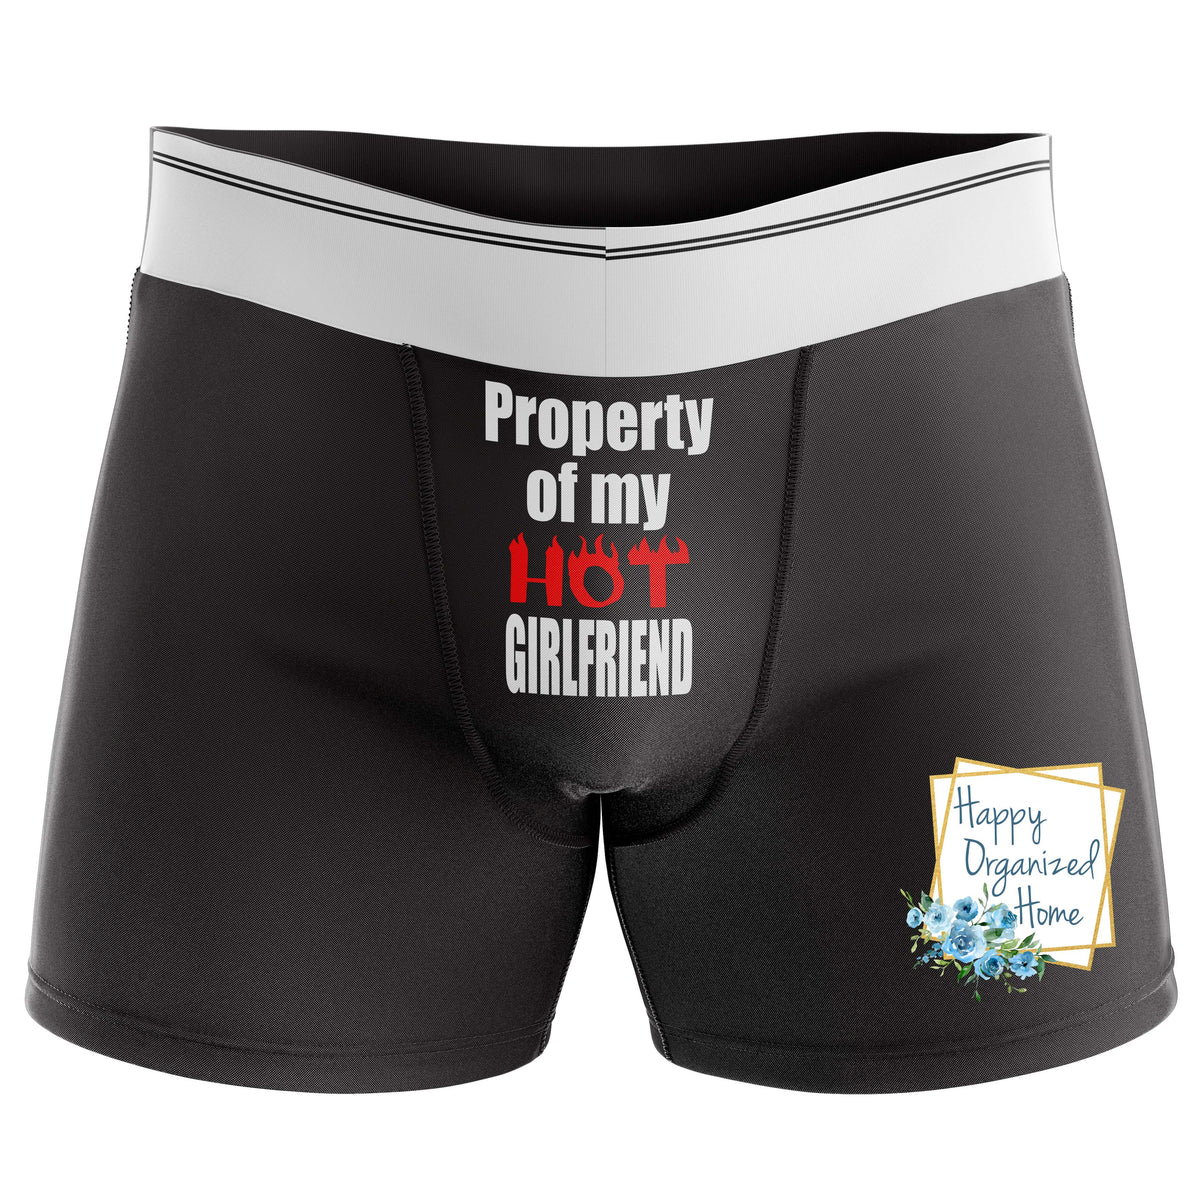 Property of my HOT girlfriend - Men's Naughty Boxer Briefs – Happy  Organized Home